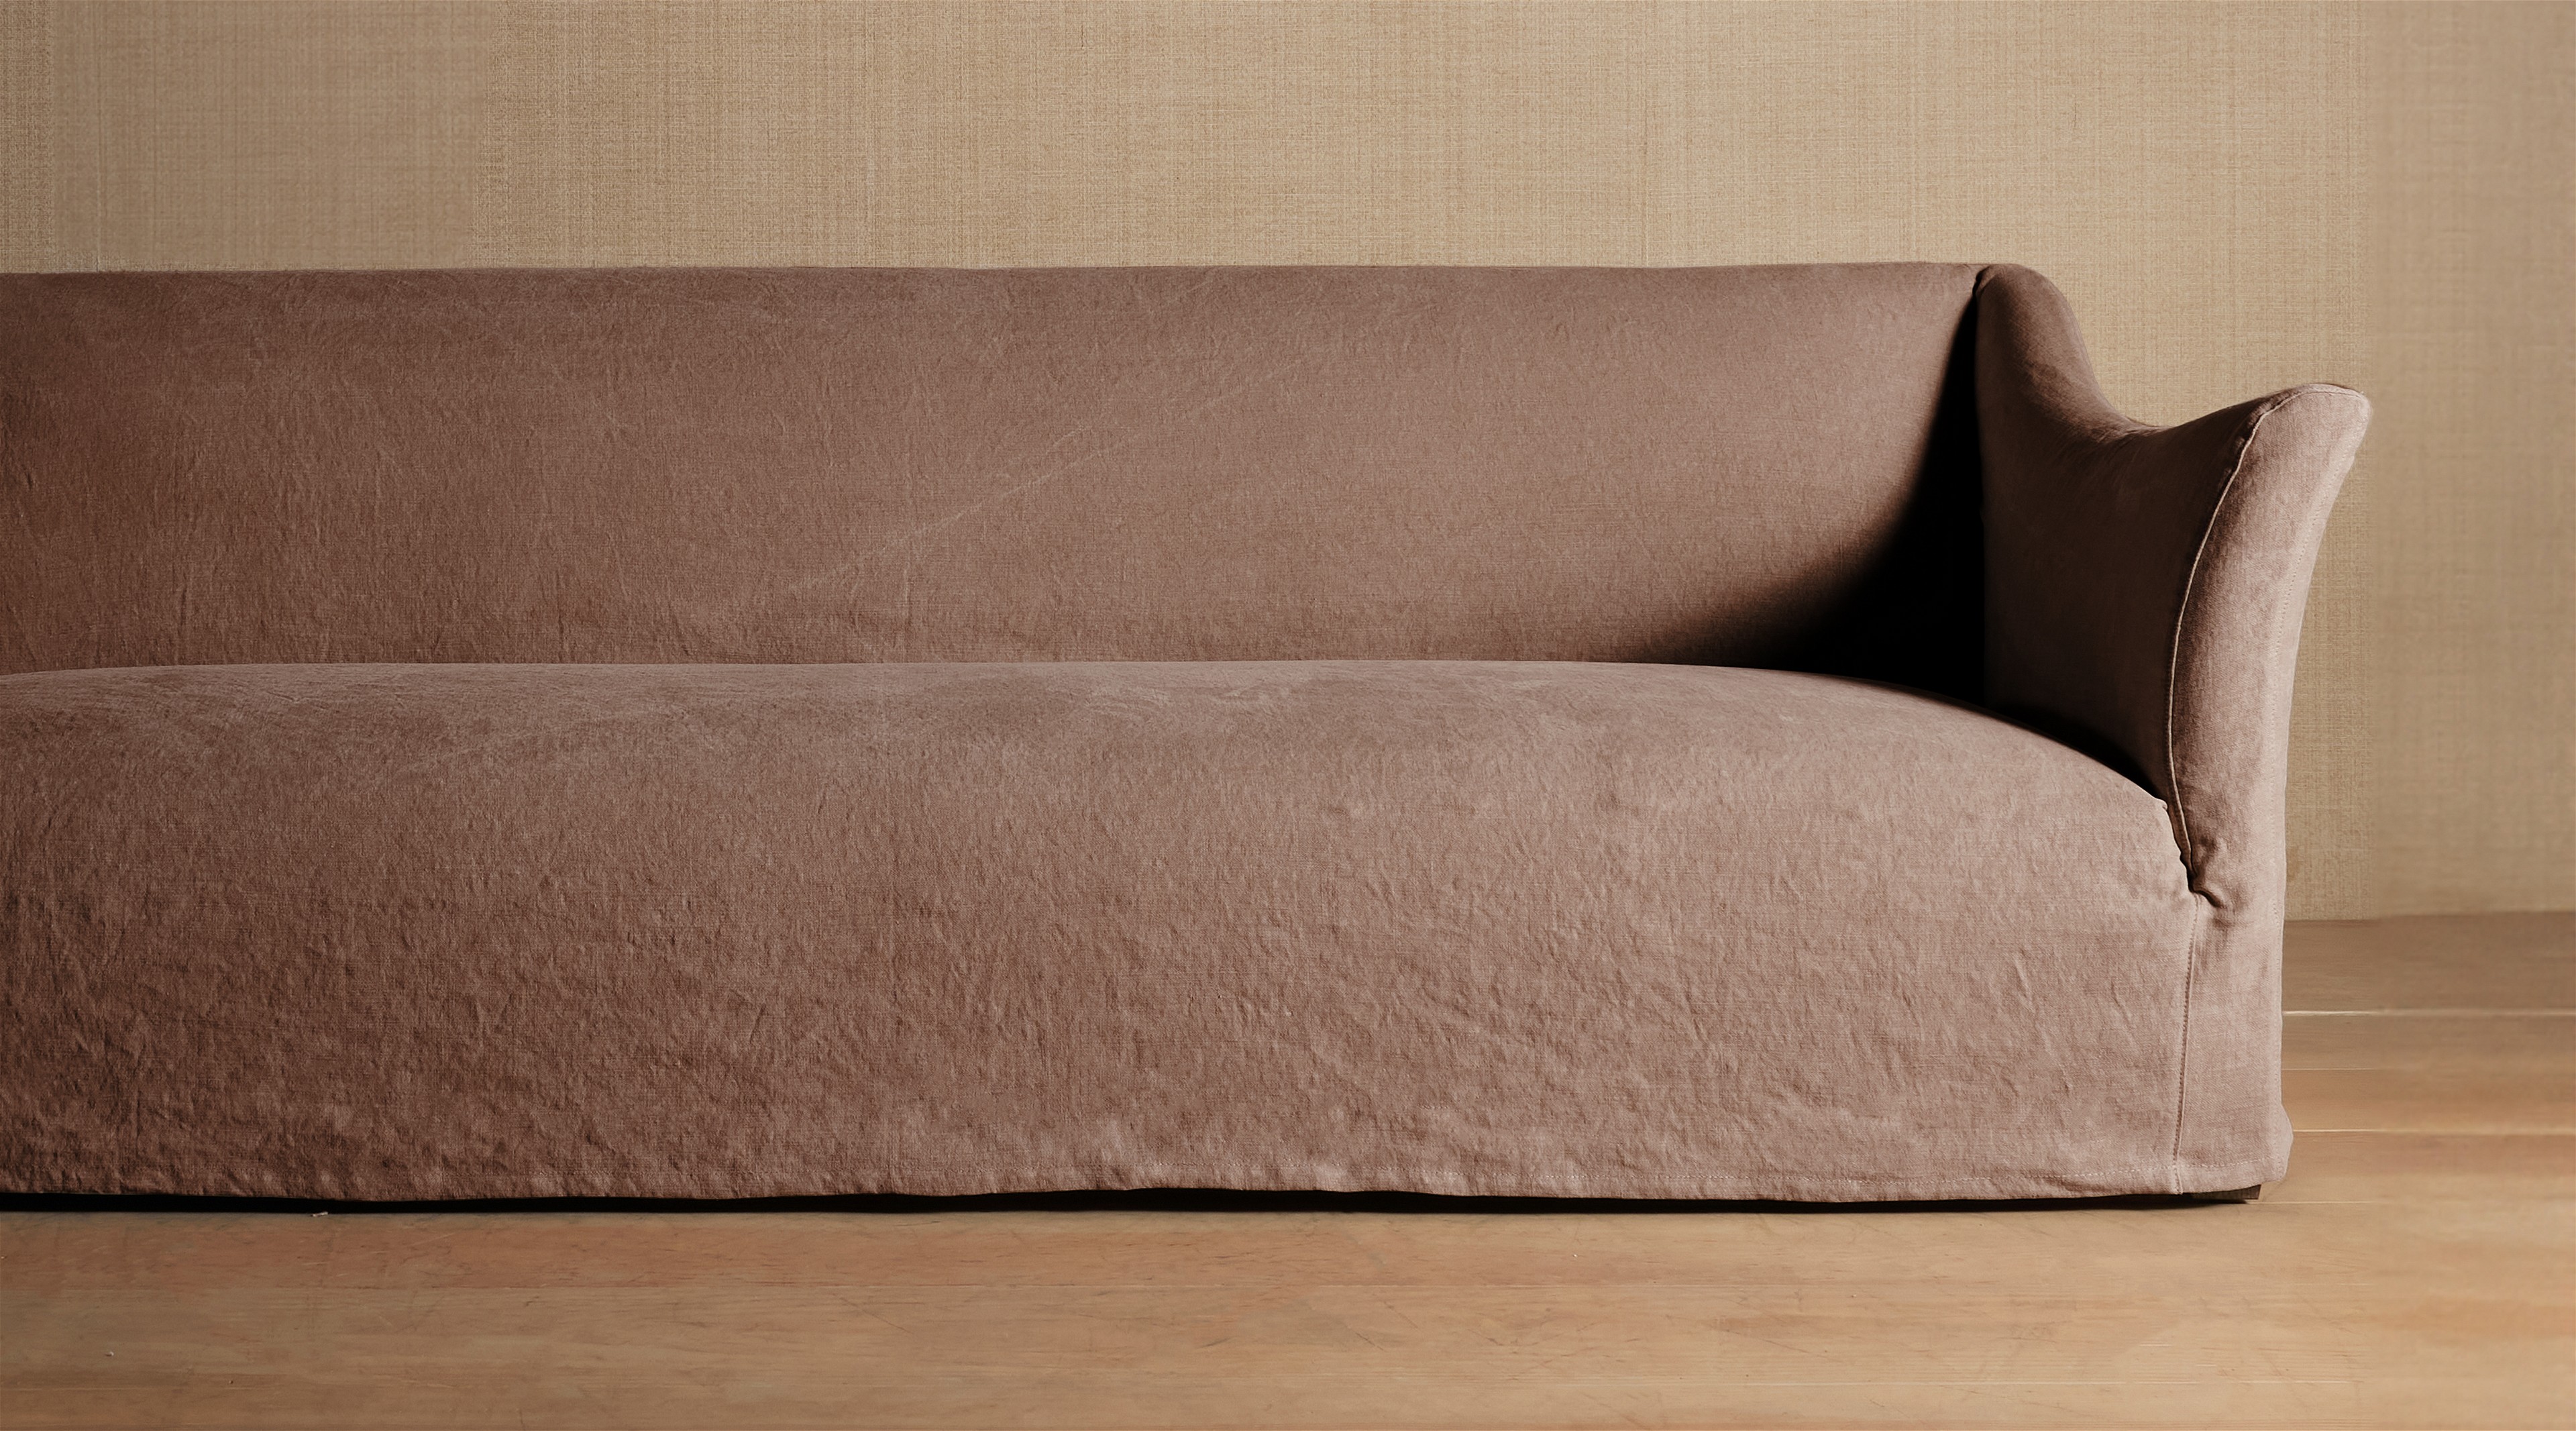 a brown couch sitting on top of a wooden floor